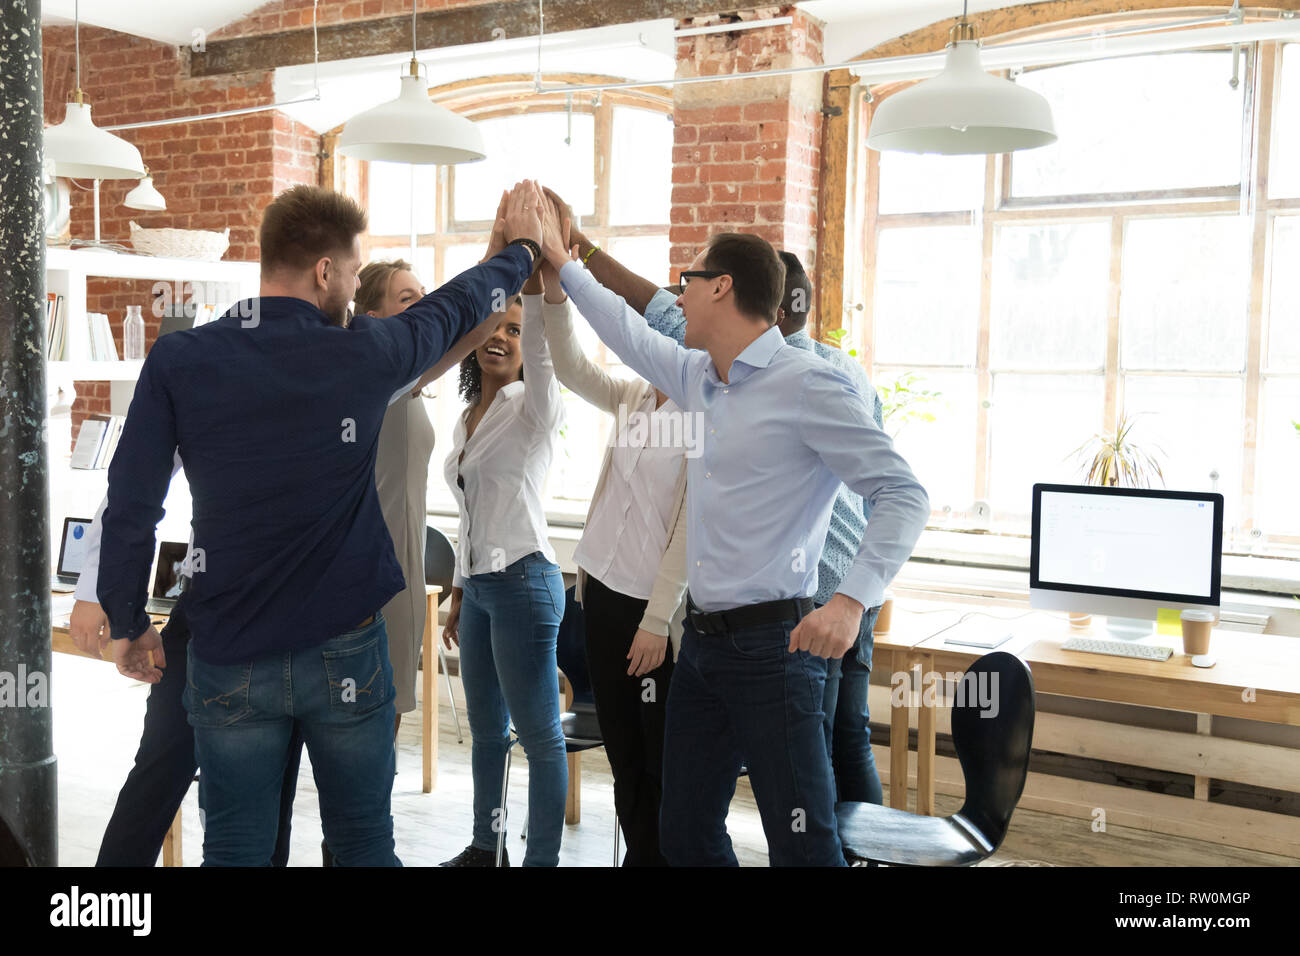 Businesspeople standing giving high five celebrating great results Stock Photo